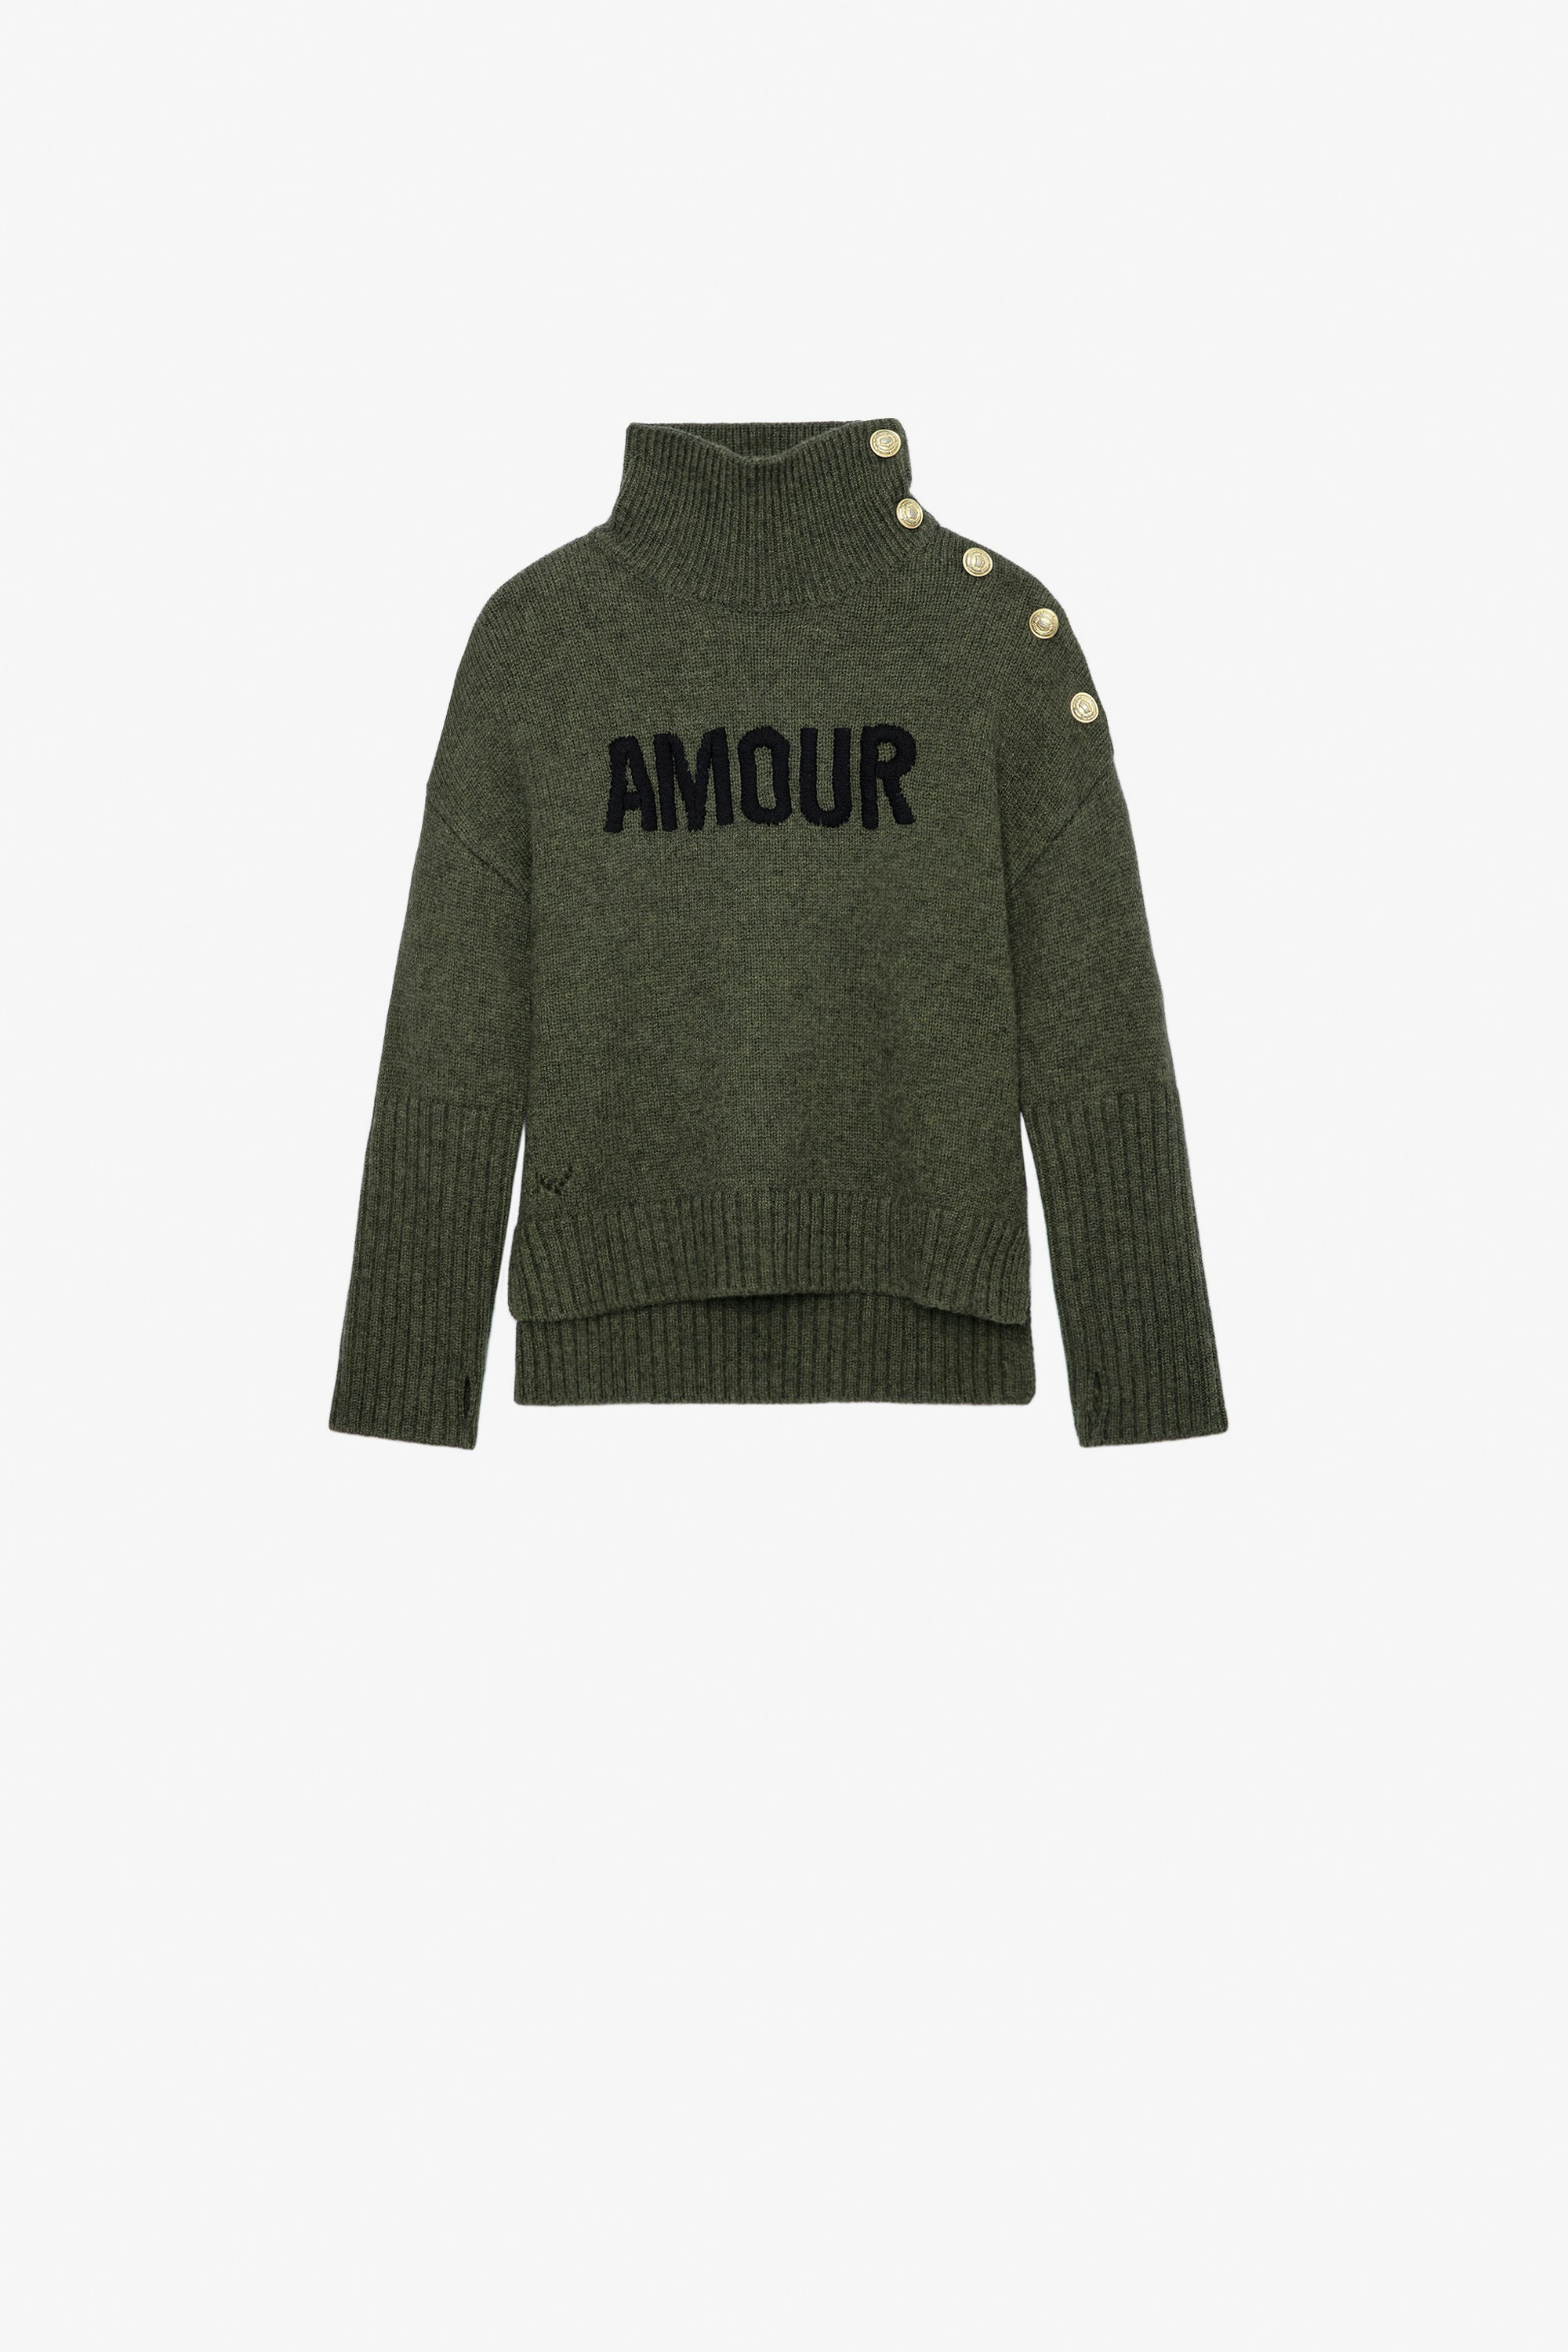 Alma Girls’ Jumper - Girls’ khaki knit turtleneck jumper with “Amour” embroidery.